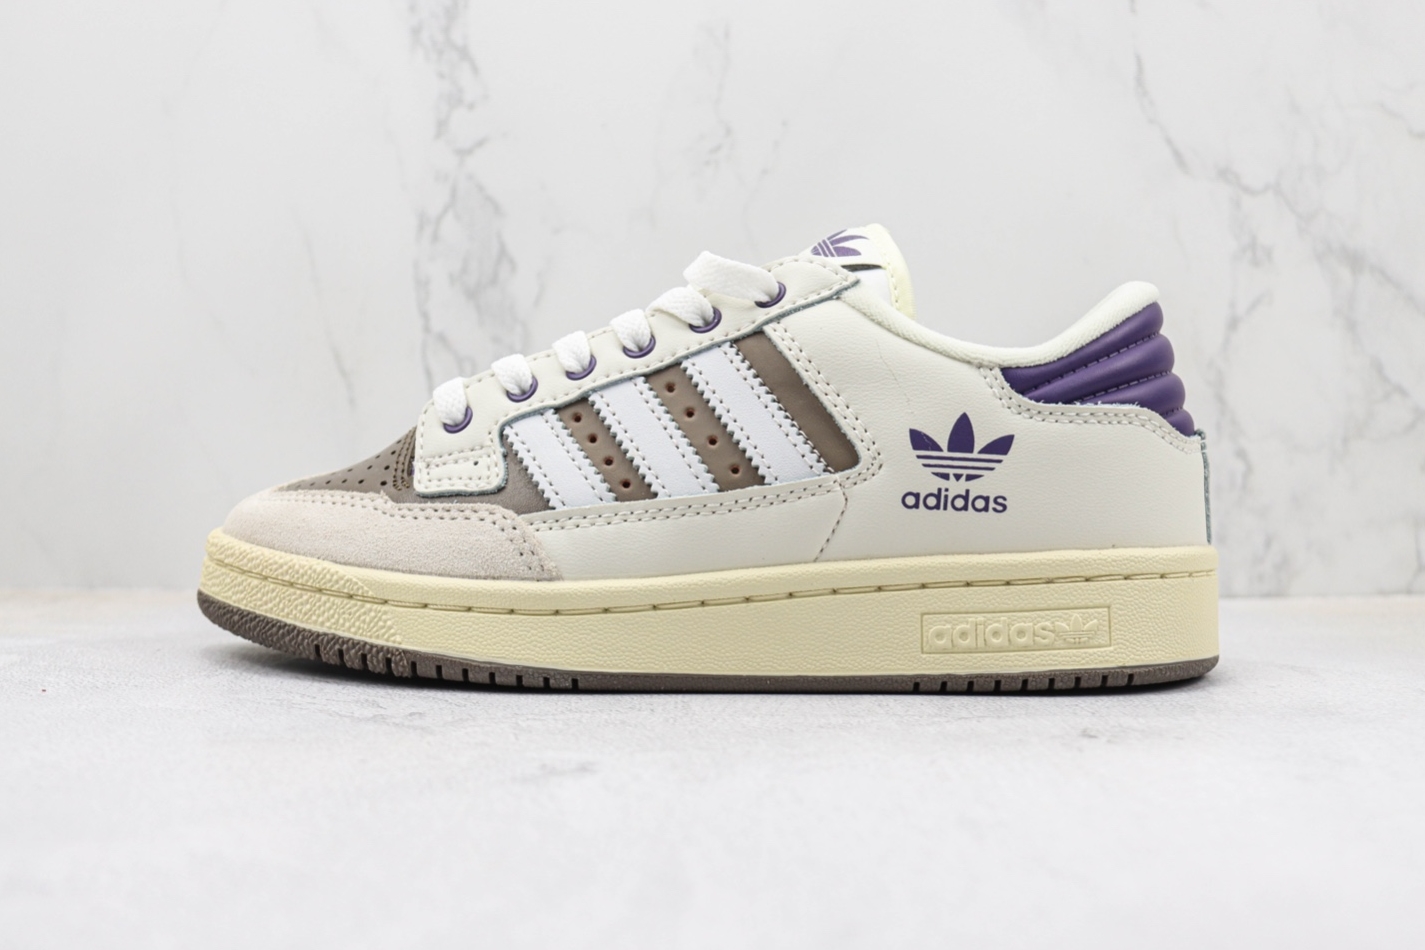 Adidas Originals Centennial 85 Low IE2369 - Stylish Classic Sneakers